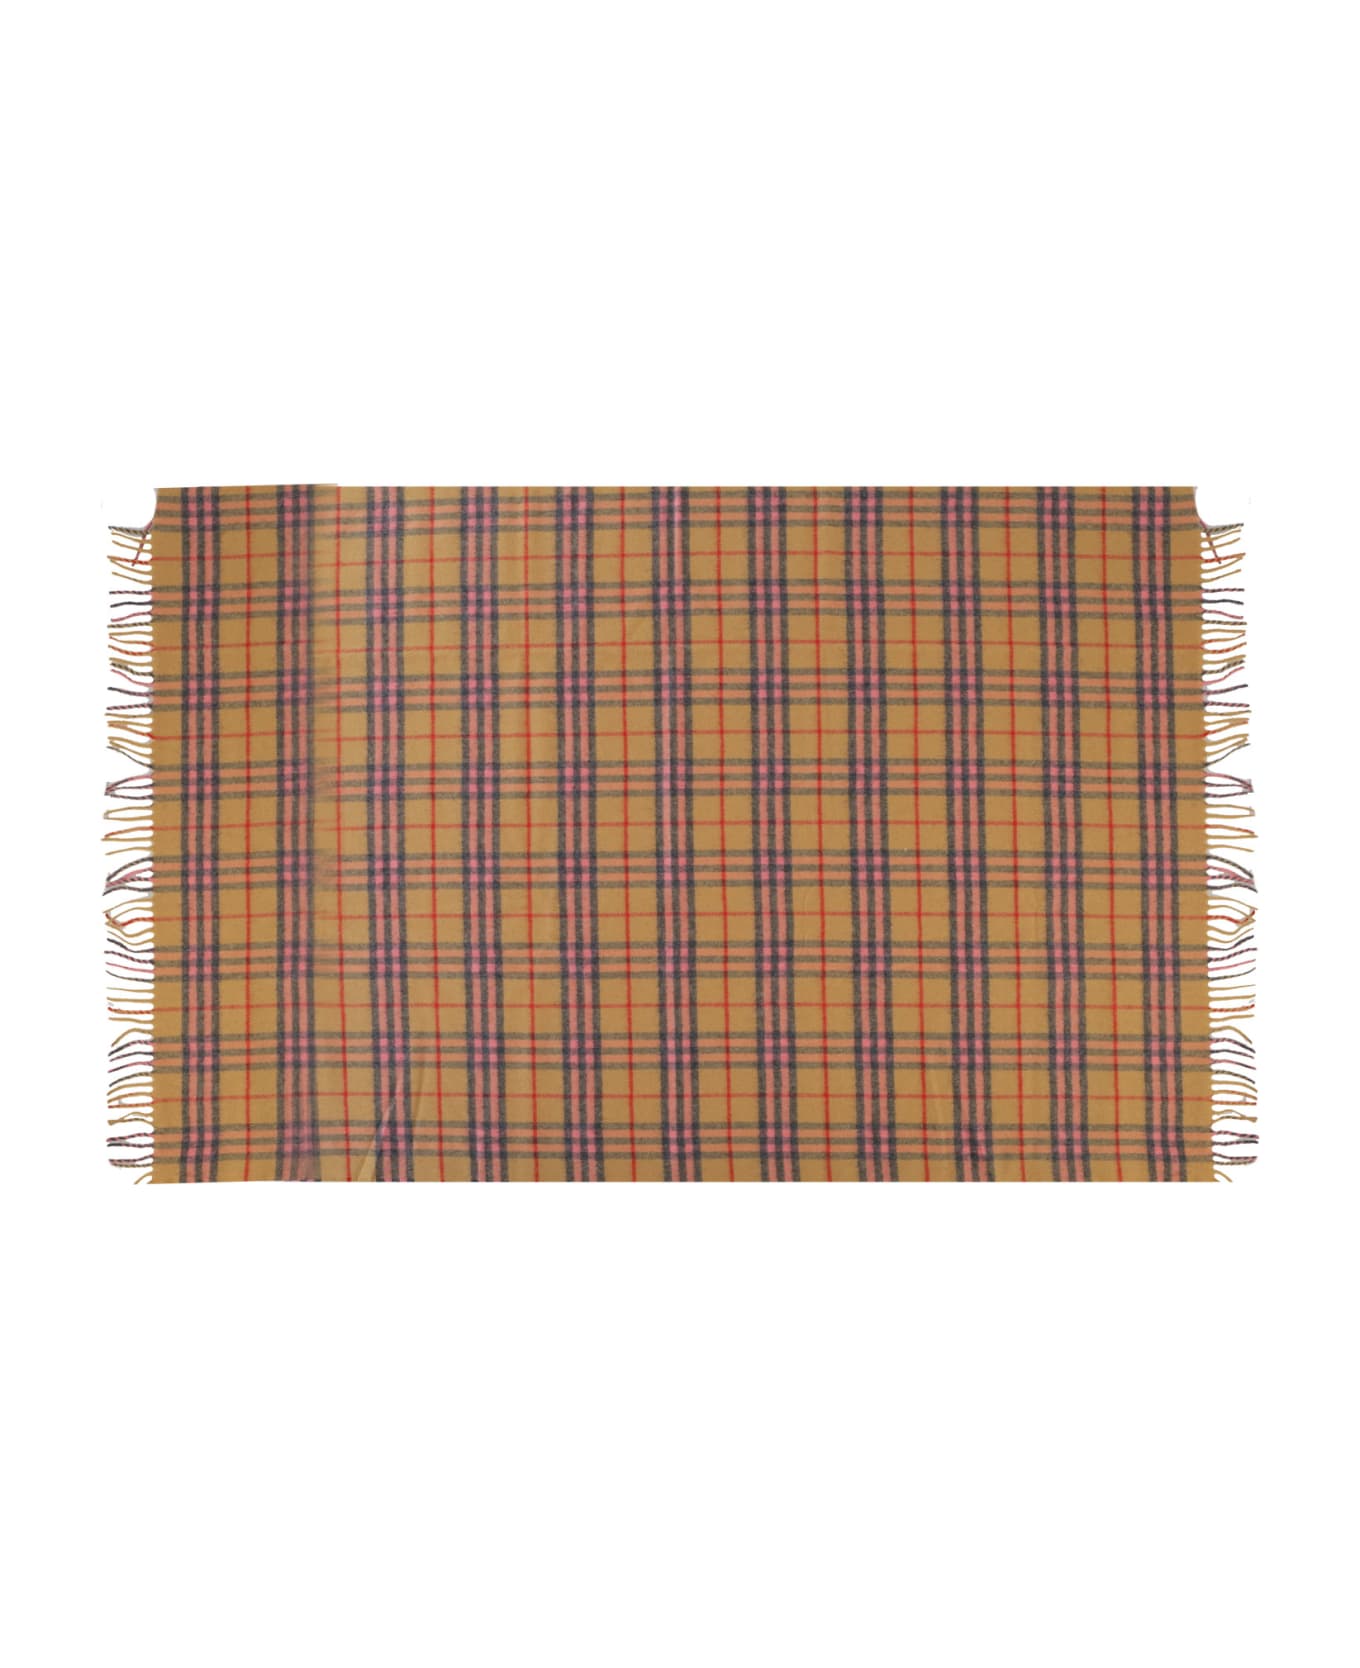 Burberry Cashmere Blanket